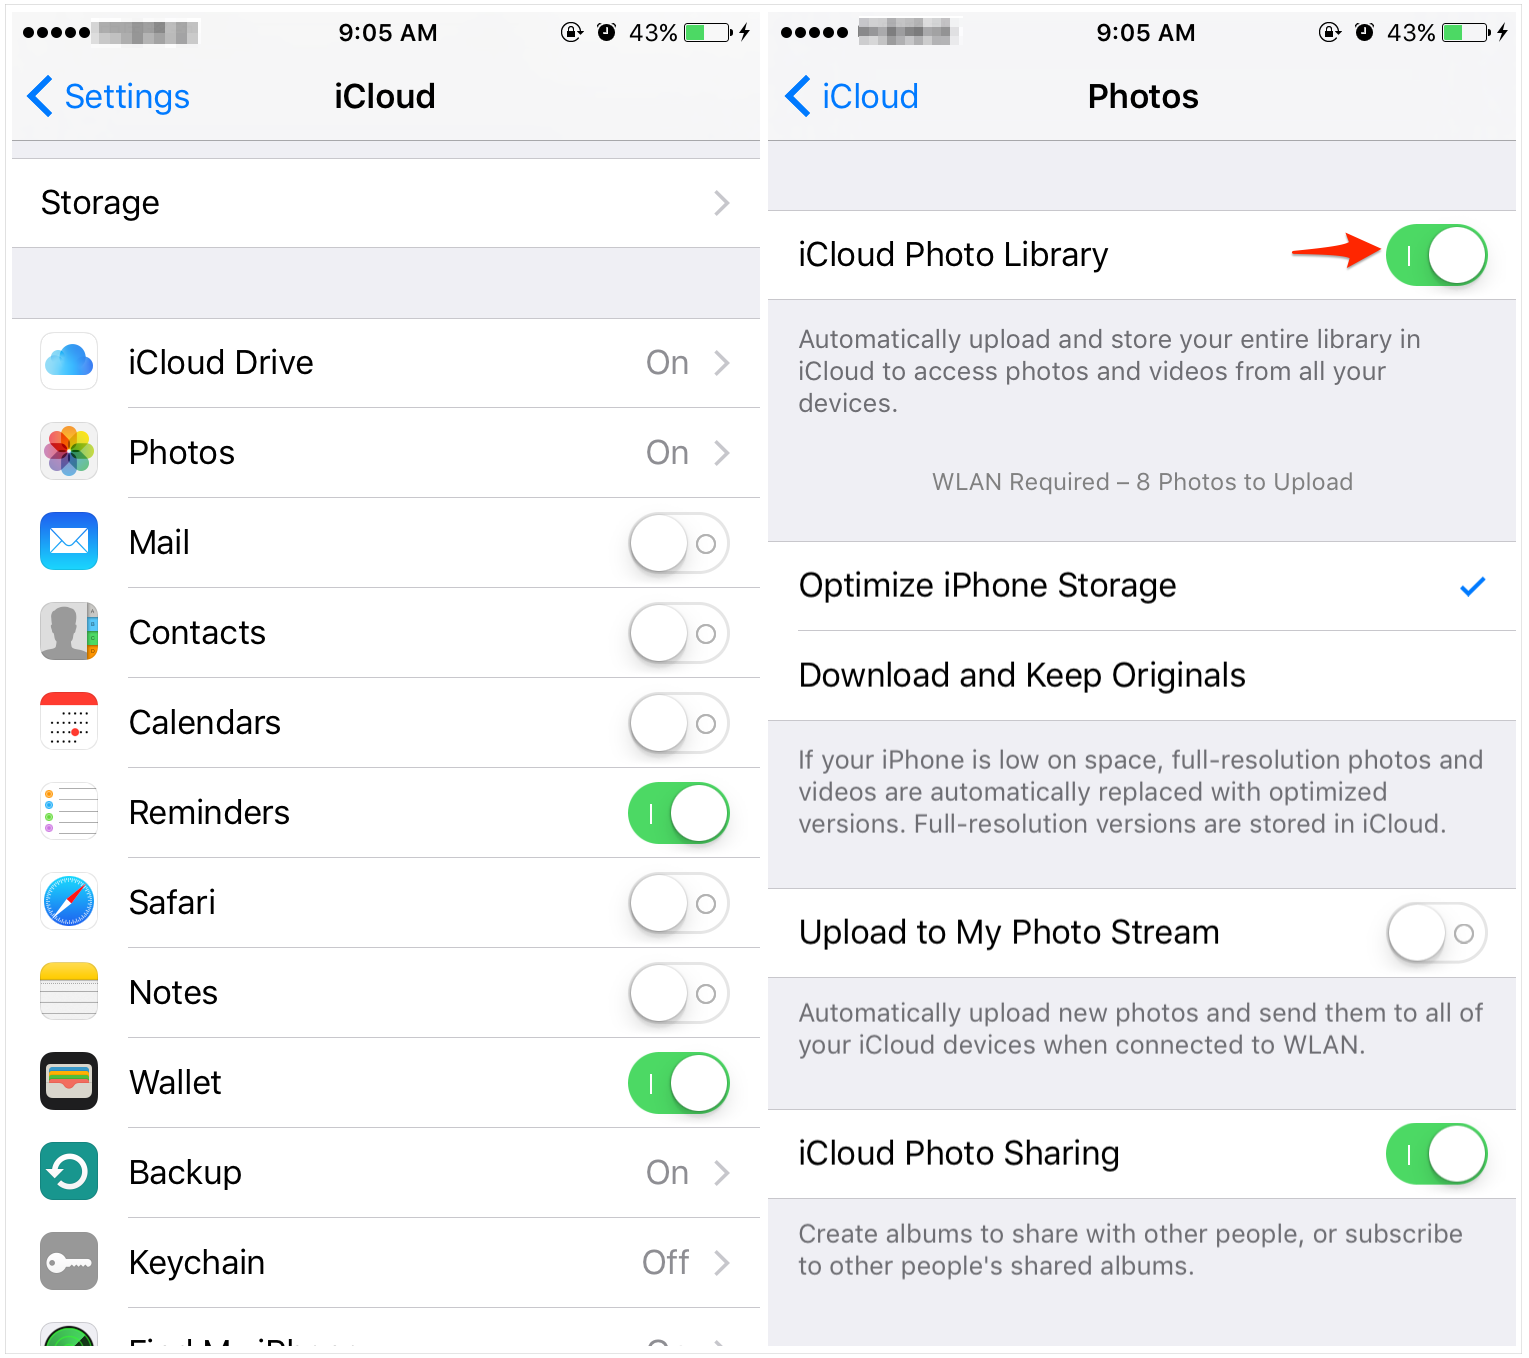 Sync Photos from iPhone to iPad with iCloud Photo Library